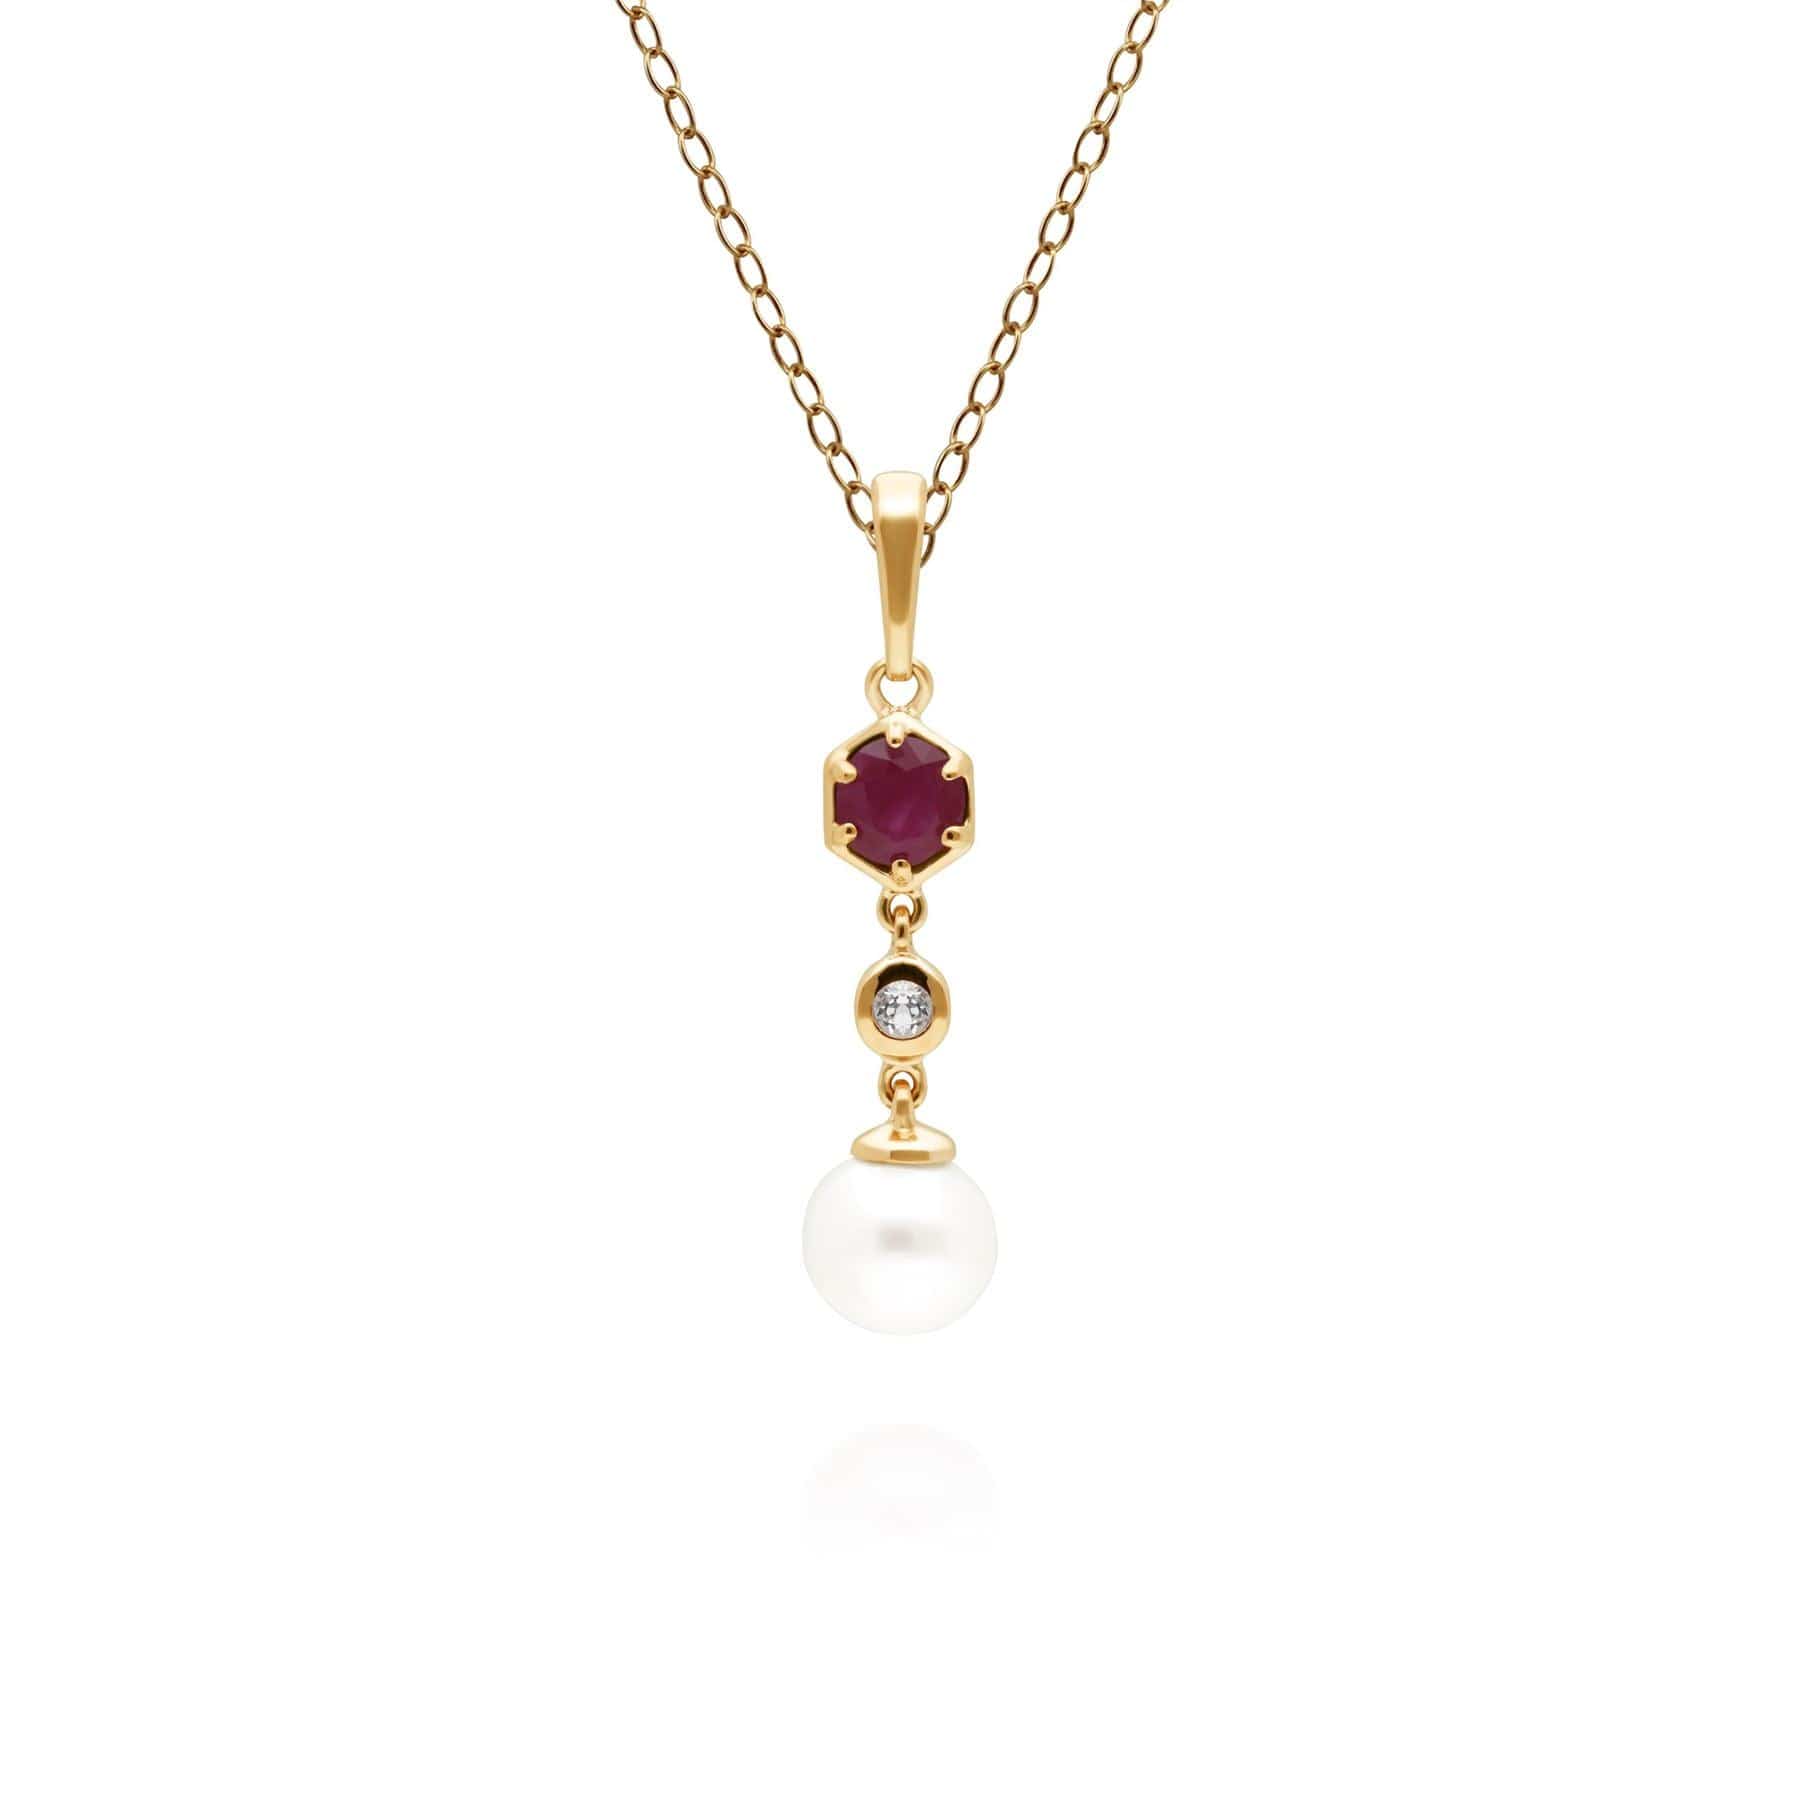 Photos - Pendant / Choker Necklace Modern Pearl, Ruby & Topaz Drop Pendant in Gold Plated Silver